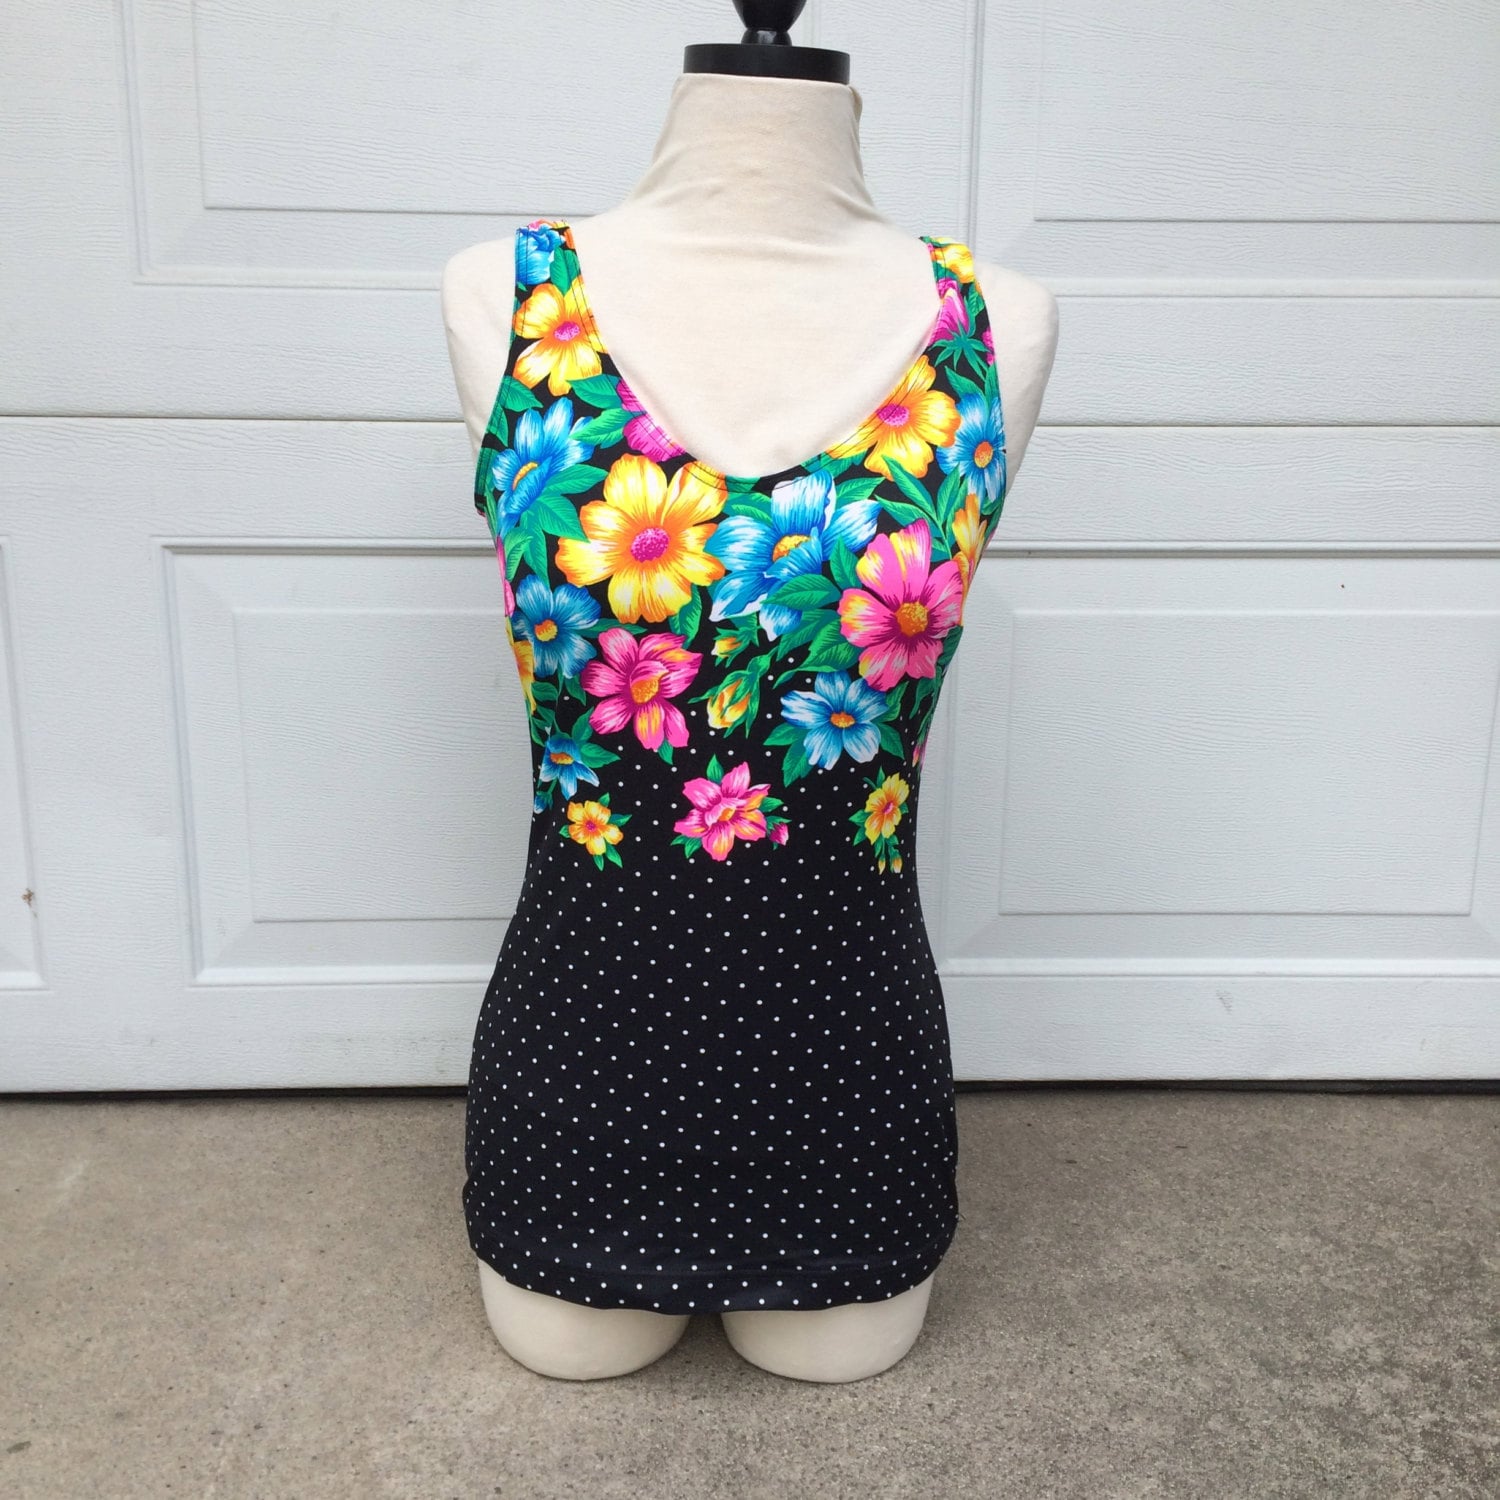 Black One Piece Modest Swimsuit 80s to 90s vintage Floral